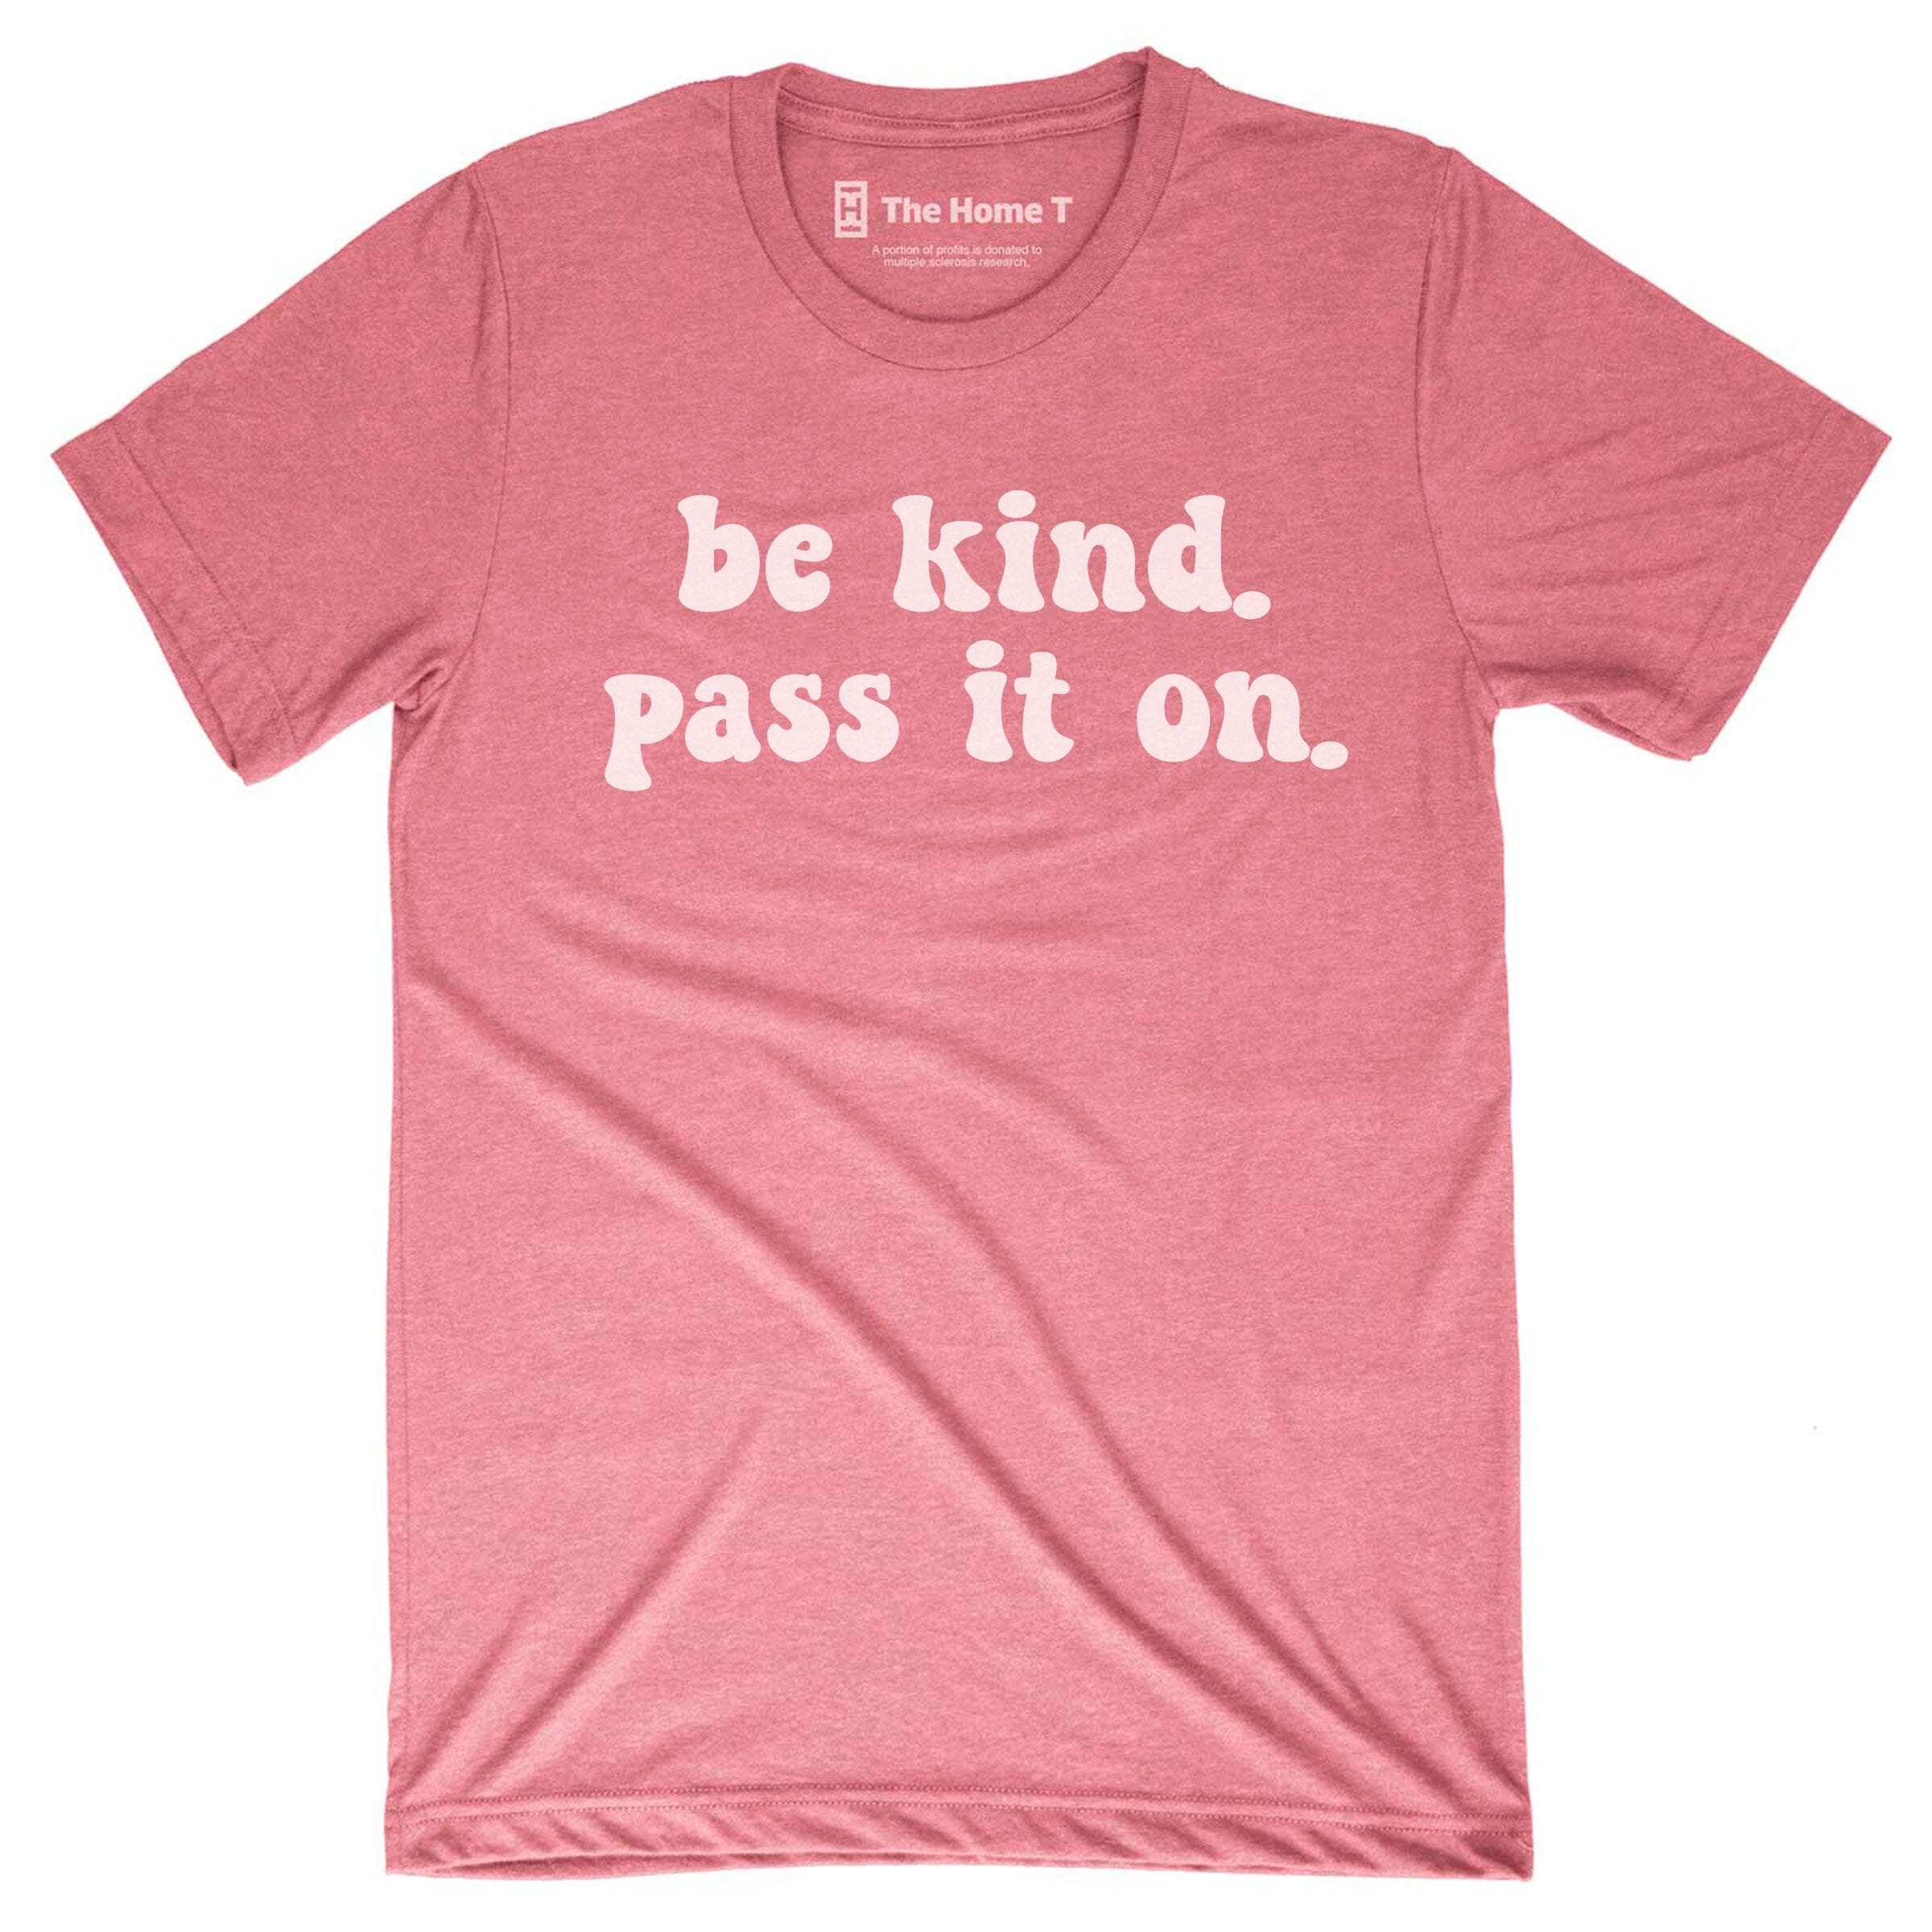 Be Kind. Pass it On.